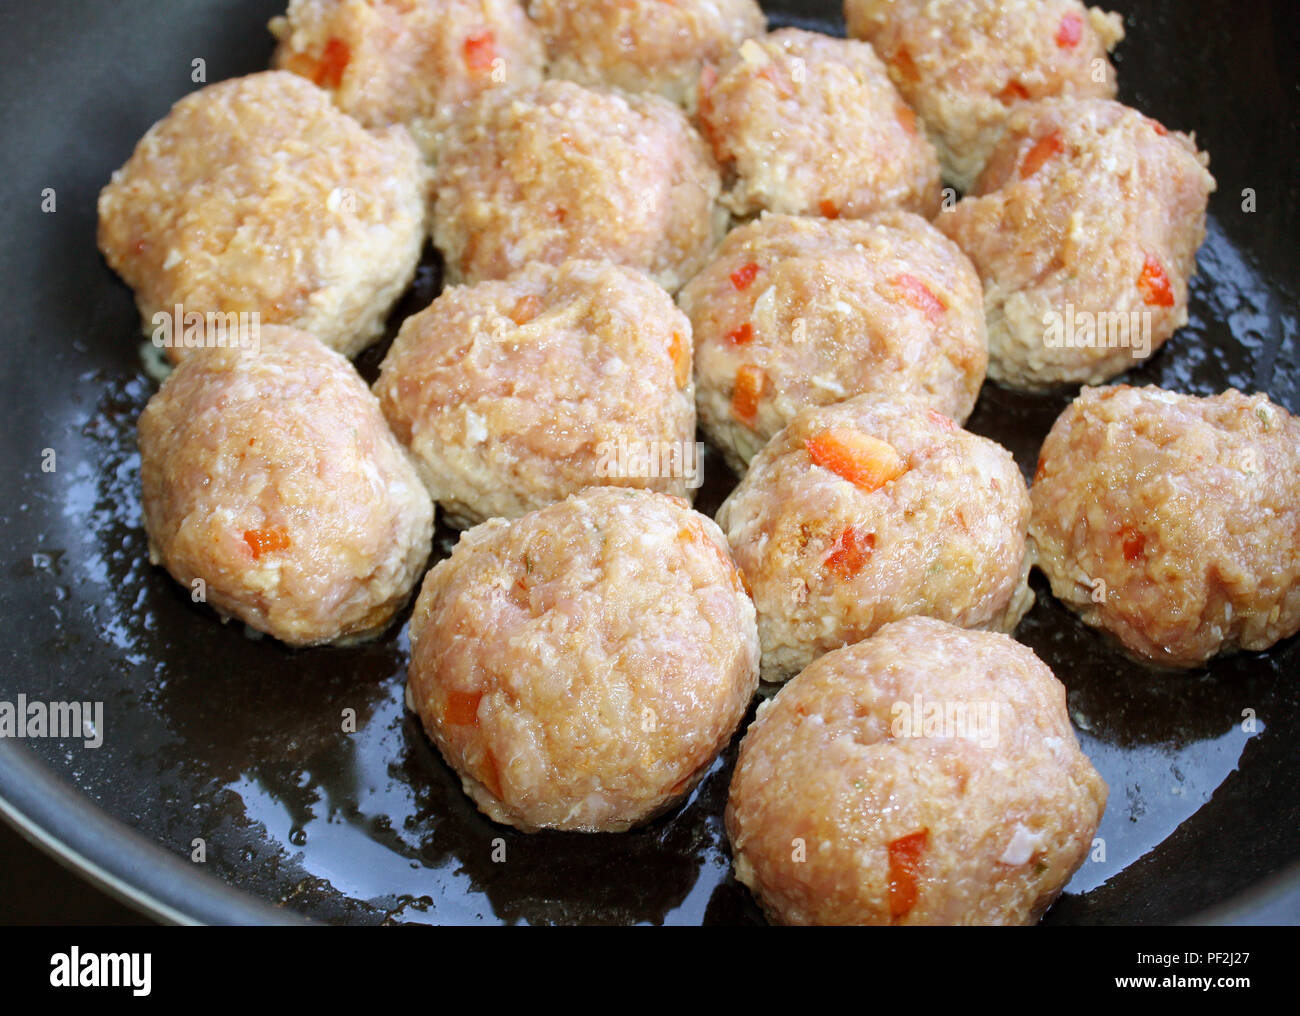 Lean ground turkey meatballs cooking in skillet Stock Photo